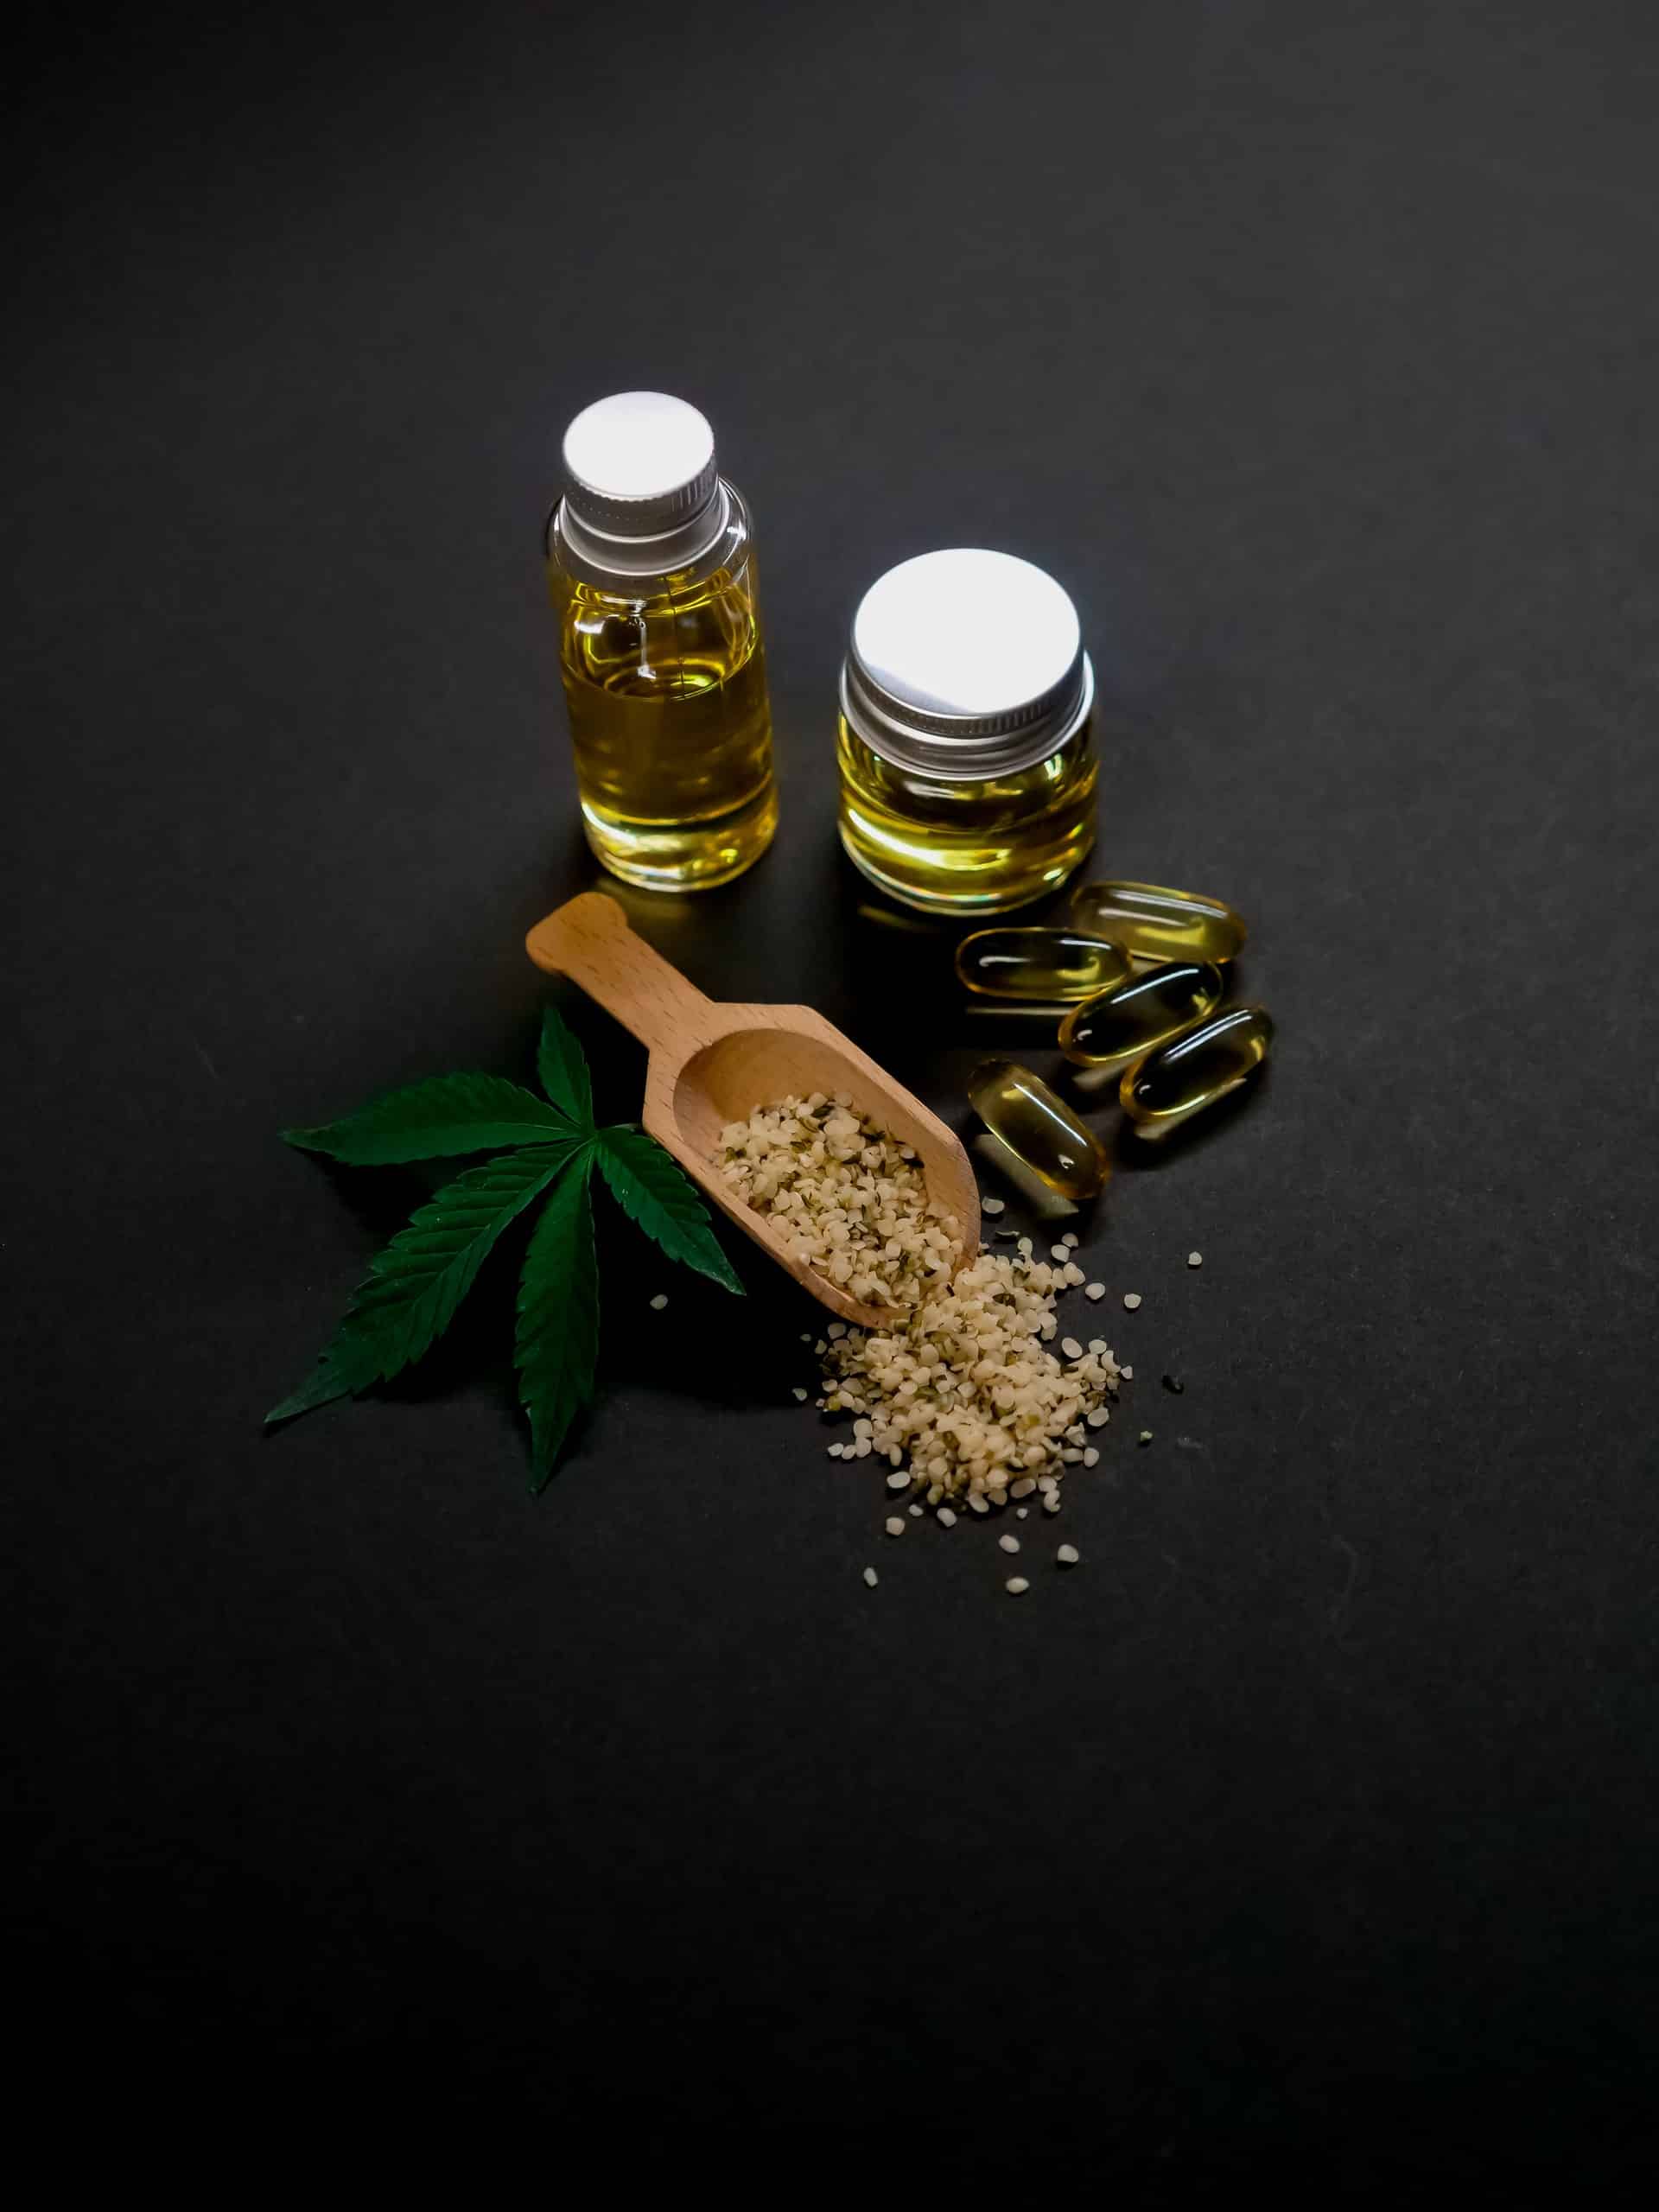 How to take CBD? Learn the 4 most popular ways and find the method for you!